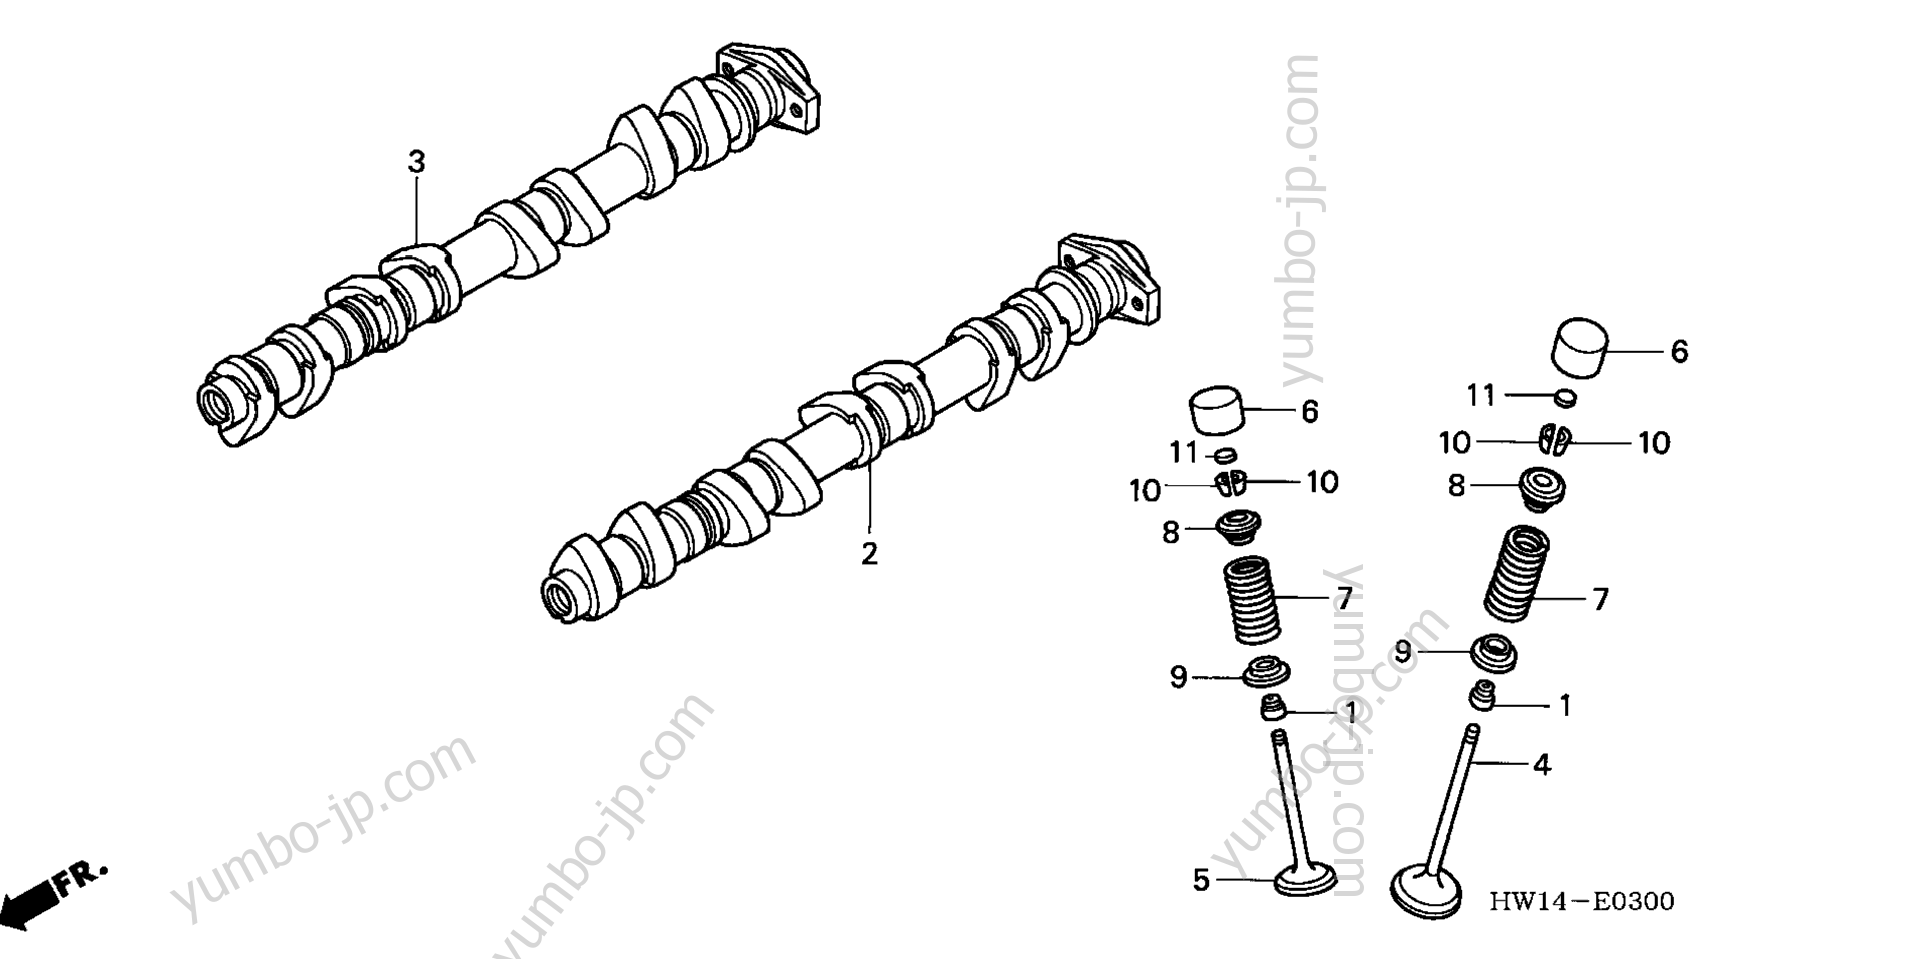 CAMSHAFT / VALVE for watercrafts HONDA ARX1200T2 A 2005 year